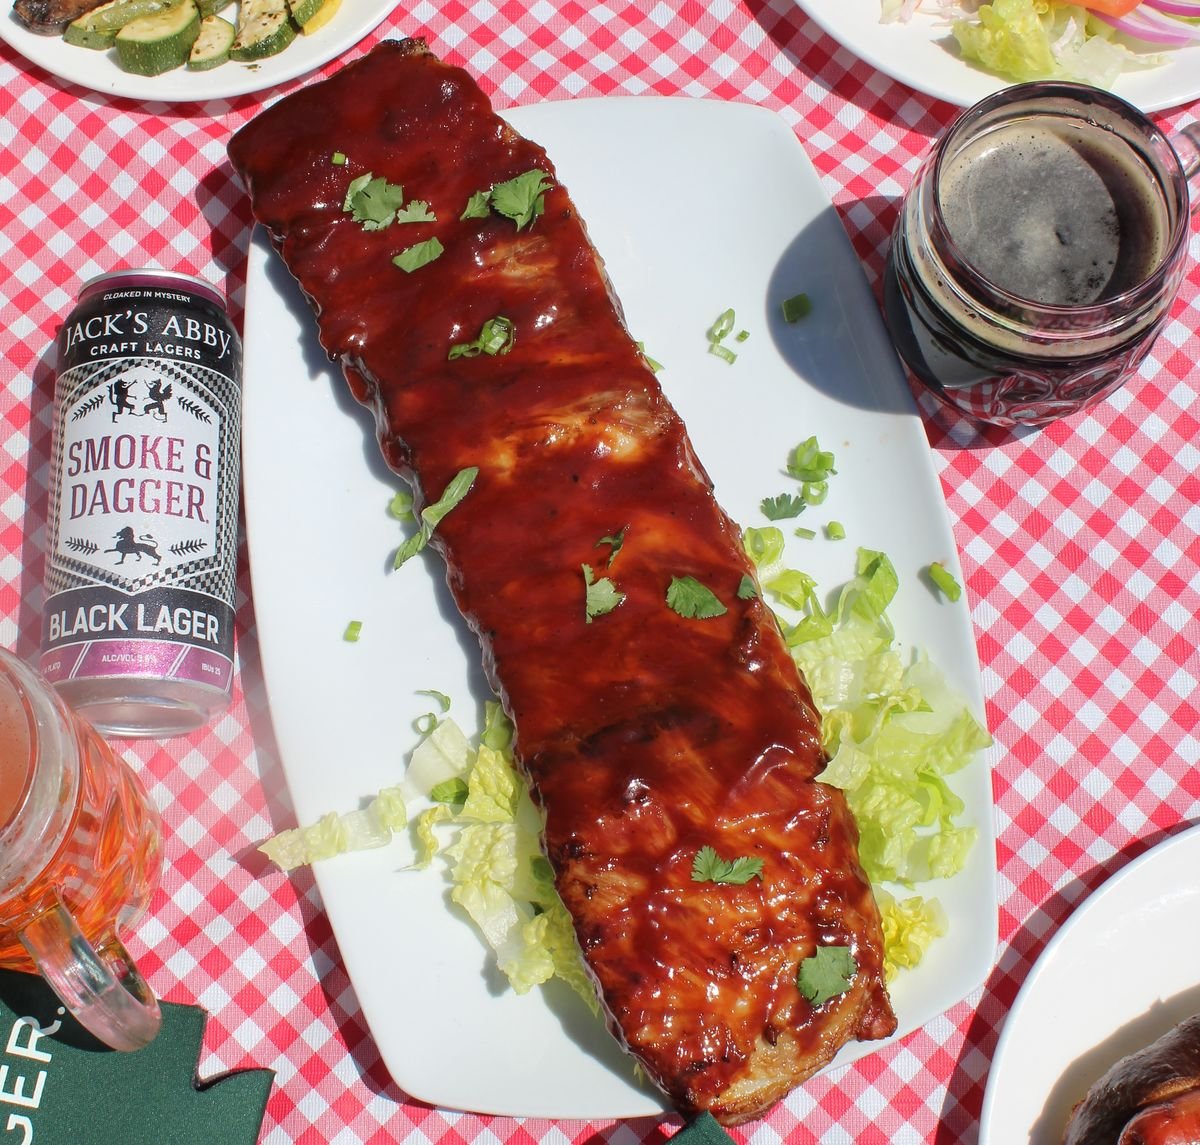  Plate of barbecue ribs with a can and poured mug of Jack' Abbey Smoke & Dagger Black Lager